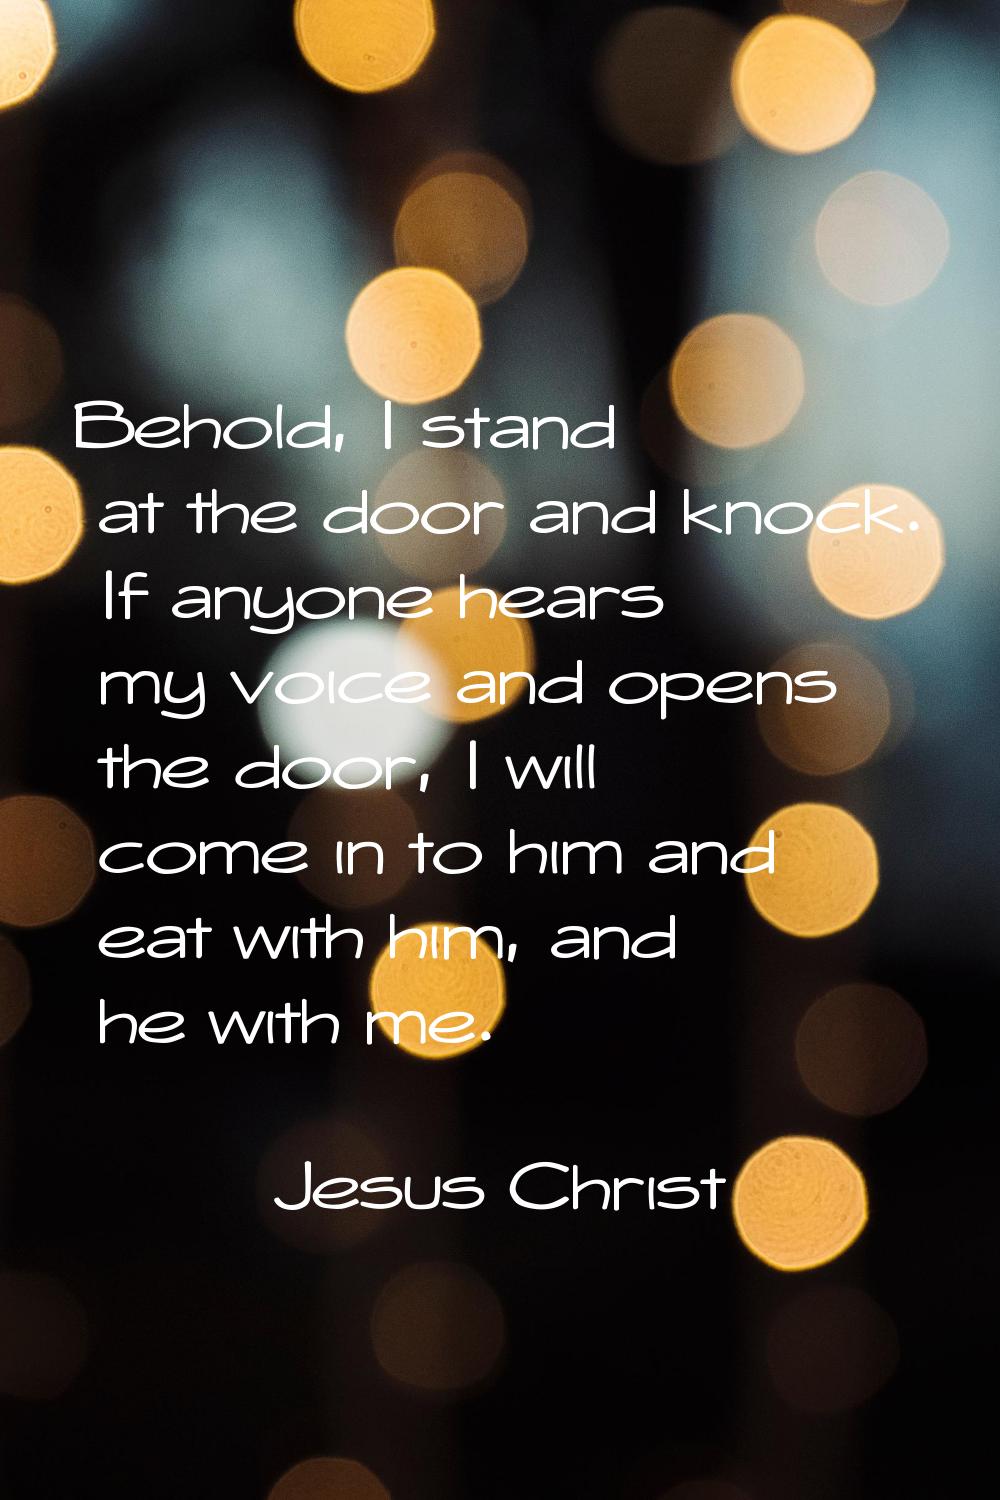 Behold, I stand at the door and knock. If anyone hears my voice and opens the door, I will come in 